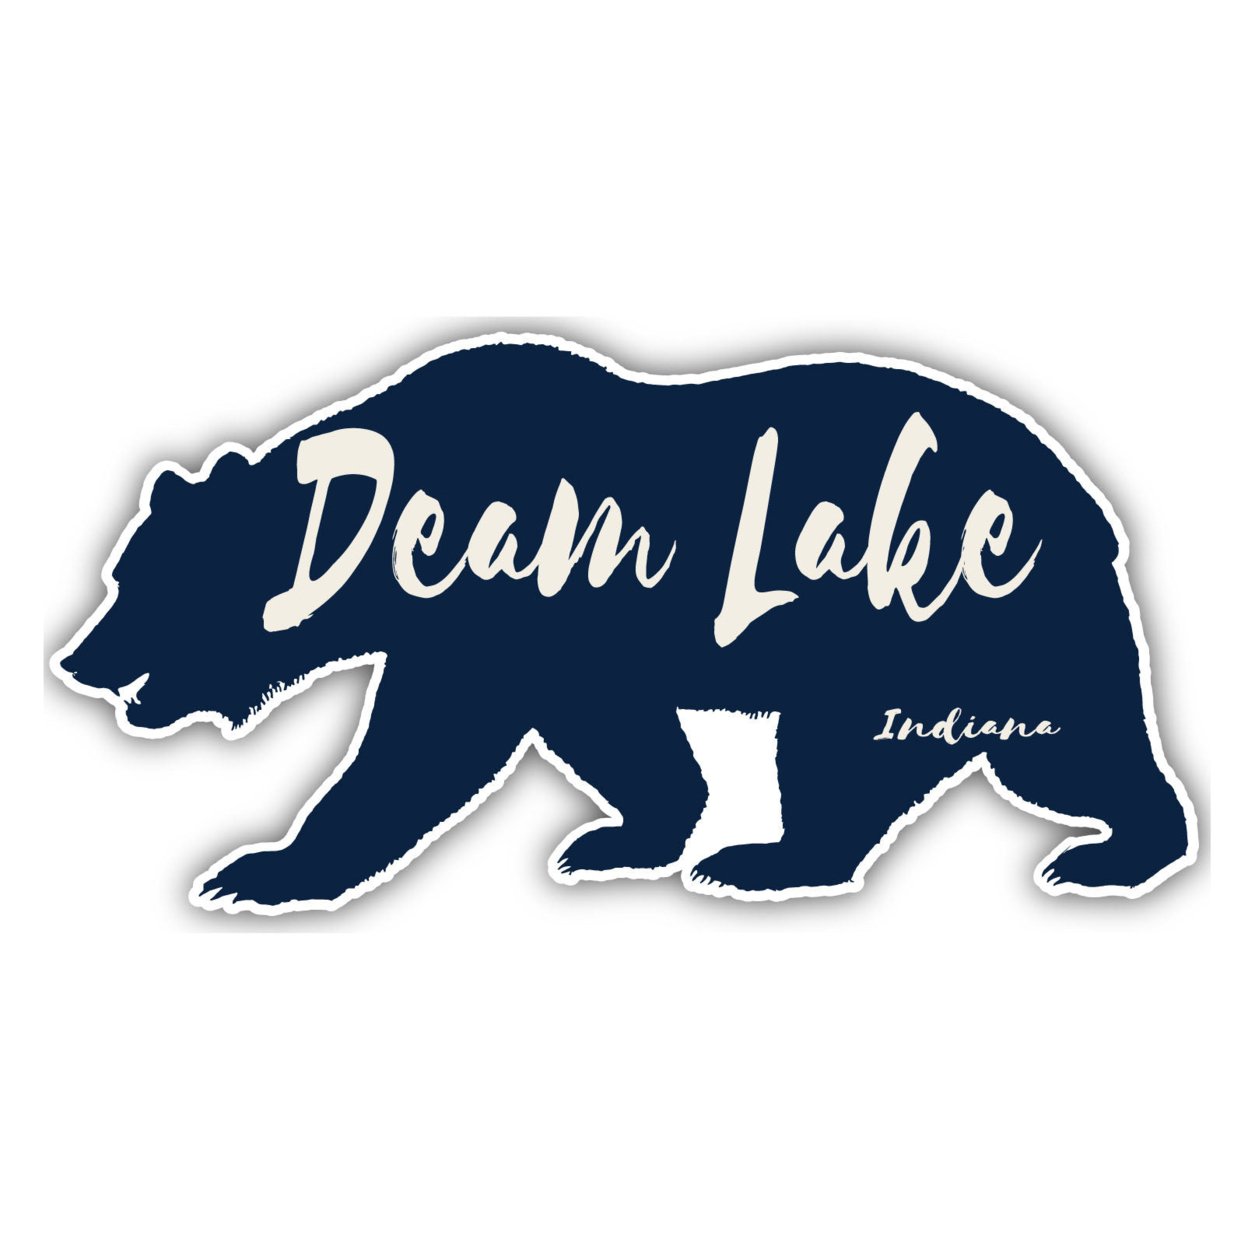 Deam Lake Indiana Souvenir Decorative Stickers (Choose Theme And Size) - 4-Pack, 4-Inch, Bear